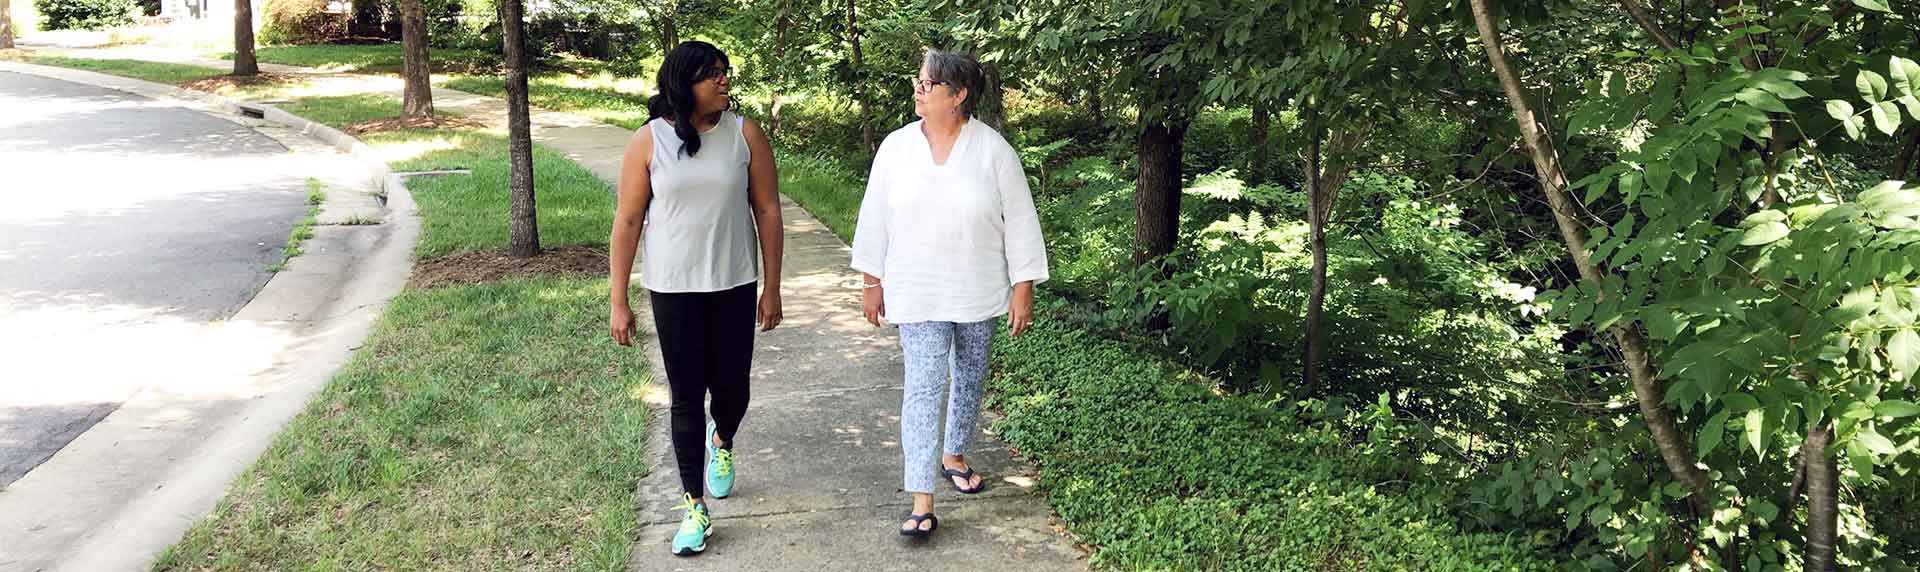 Bariatric surgery patients on a healthy walk after successful weight loss